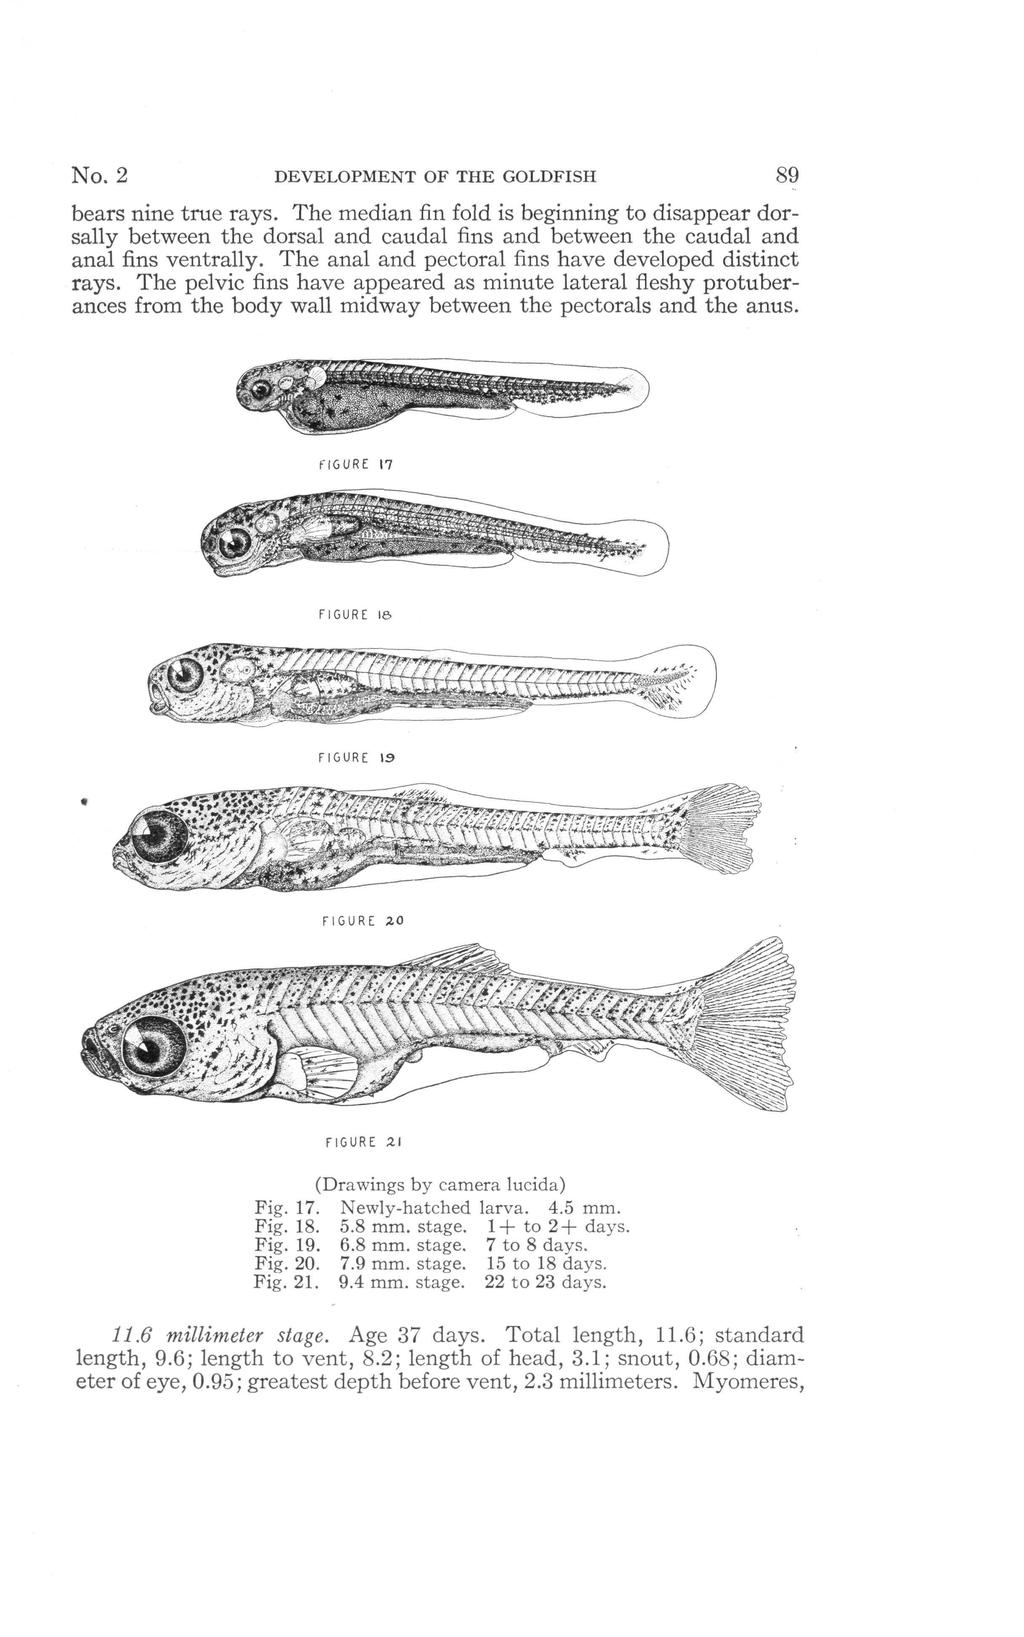 No. 2 DEVELOPMENT OF THE GOLDFISH 89 bears nine true rays. The median fin fold is beginning to disappear dorsally between the dorsal and caudal fins and between the caudal and anal fins ventrally.